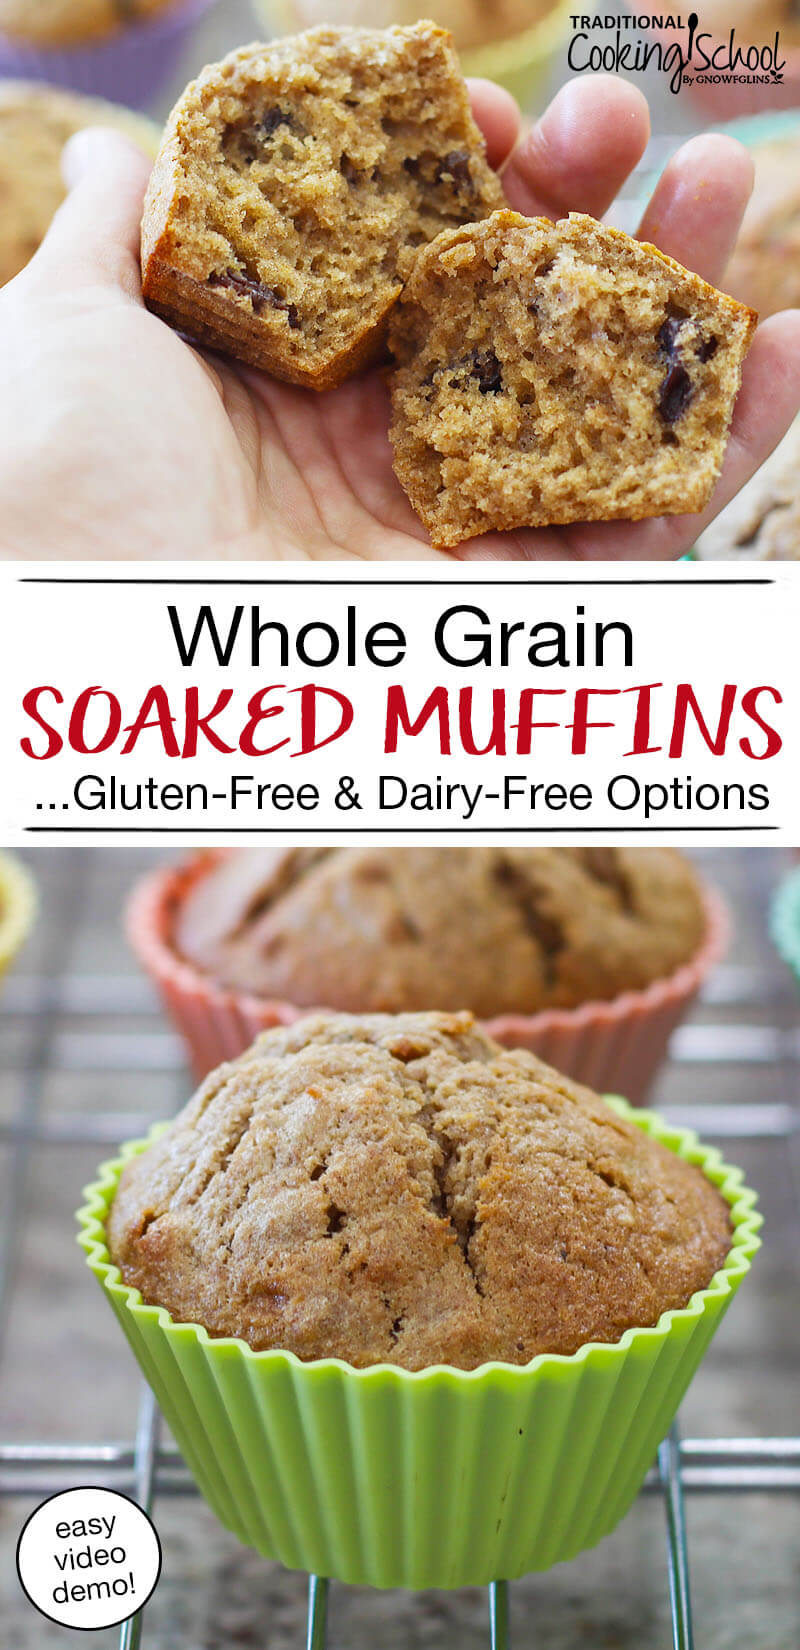 photo collage of beautiful golden brown muffins, including a shot of woman's hand holding a muffin broken up to show the texture, and a shot of a muffin in a lime green silicone muffin cup, with text overlay: "Whole Grain Soaked Muffins...Gluten-Free & Dairy-Free Options (easy video demo)"